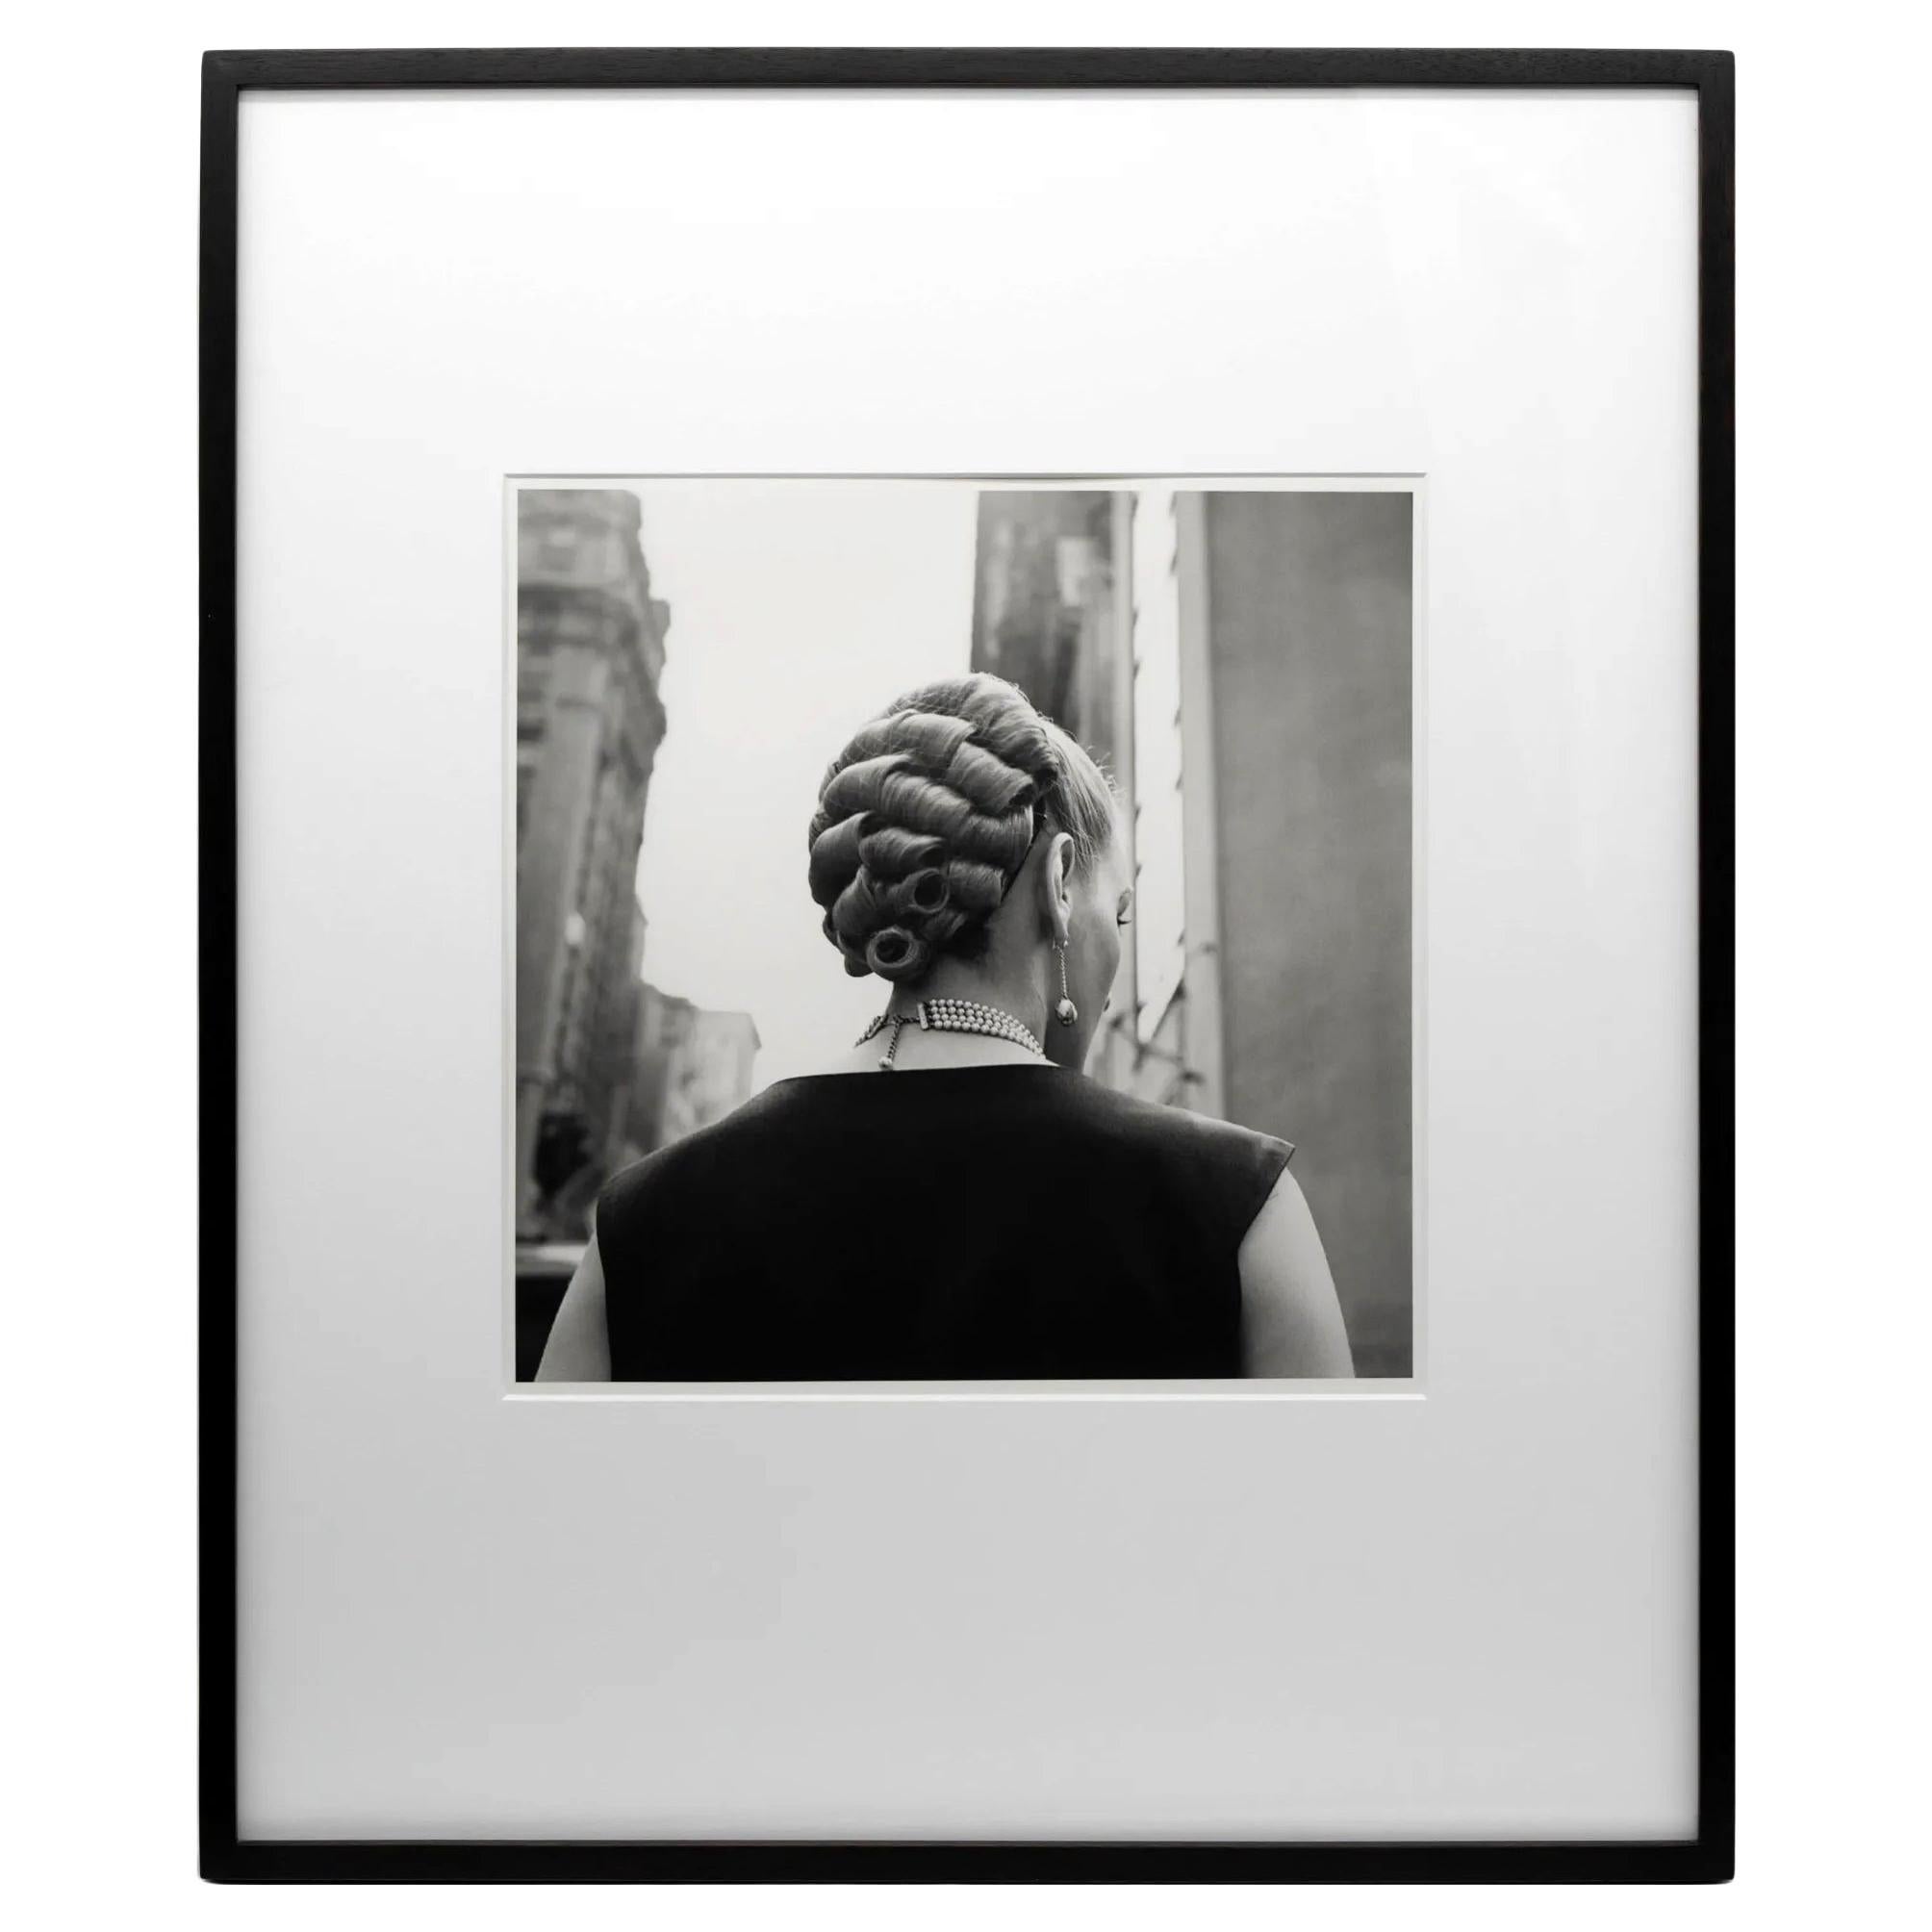 Framed Street Photograph by Vivian Maier Editioned with Provenance For Sale